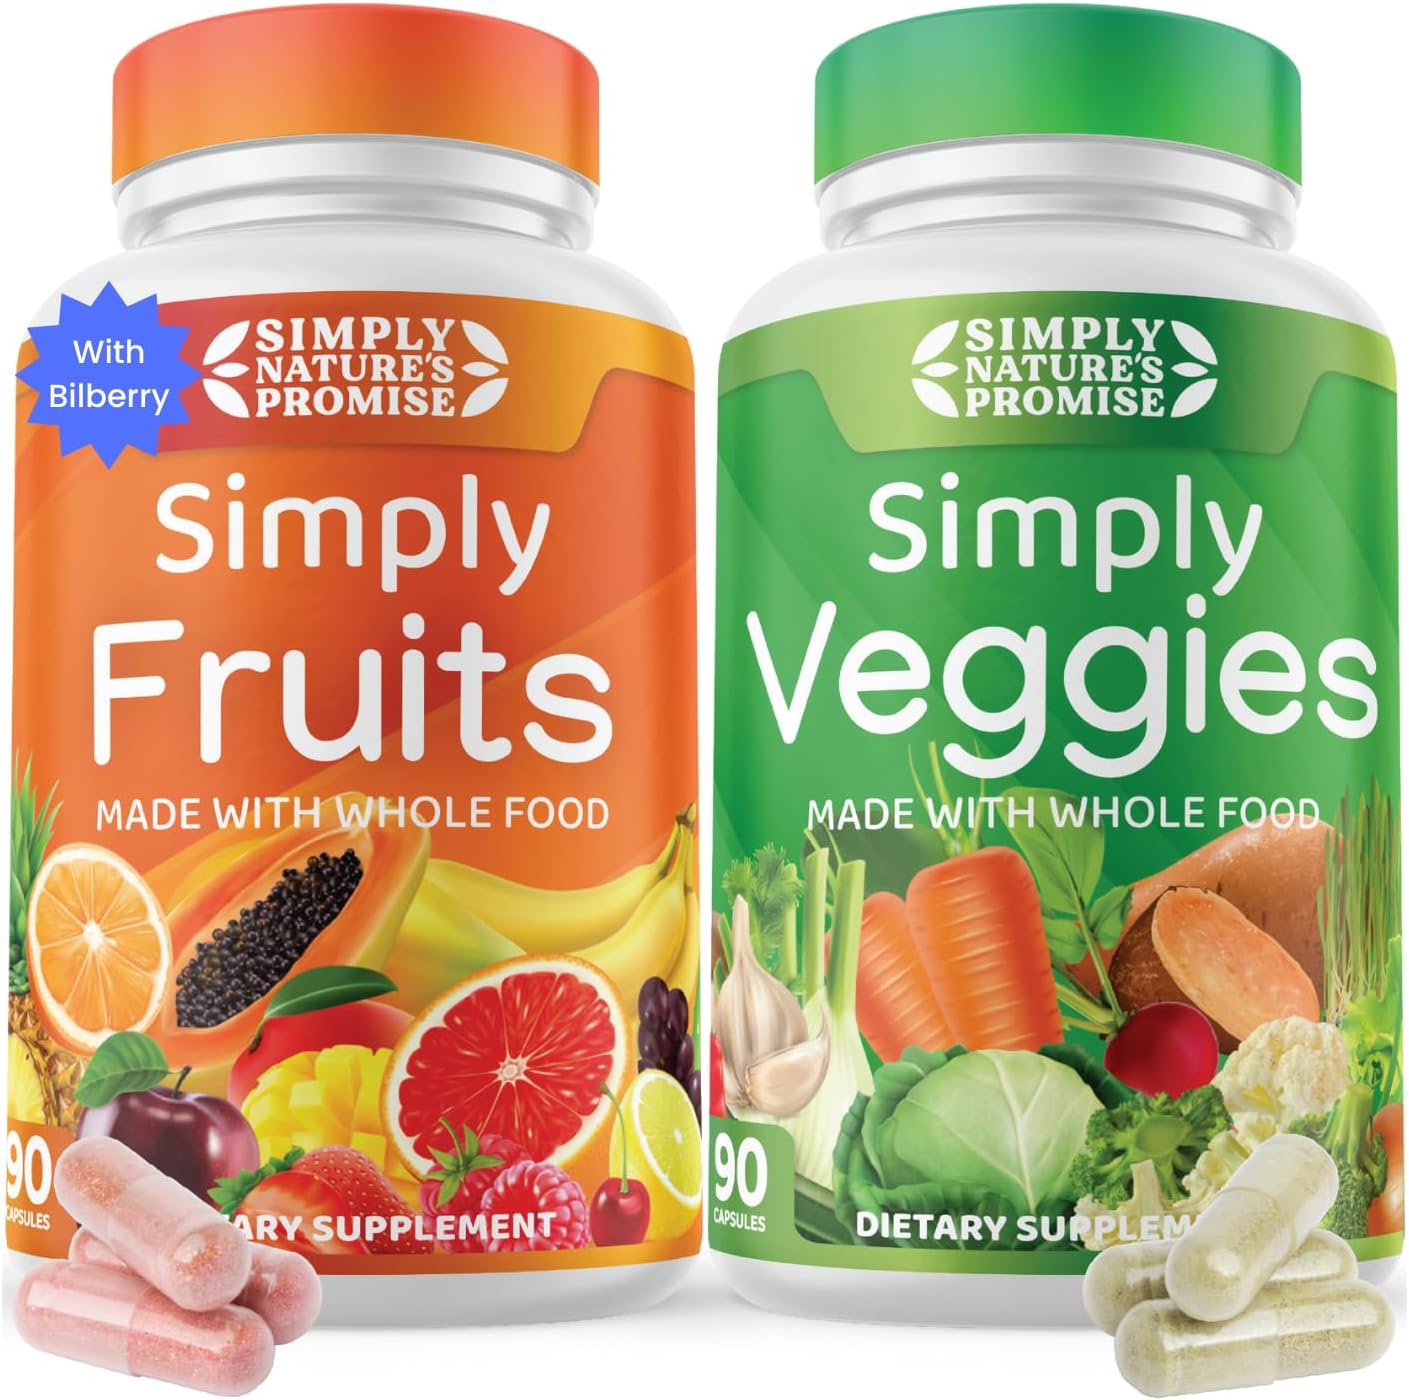 Simply Nature’s Promise Fruits & Veggies Review